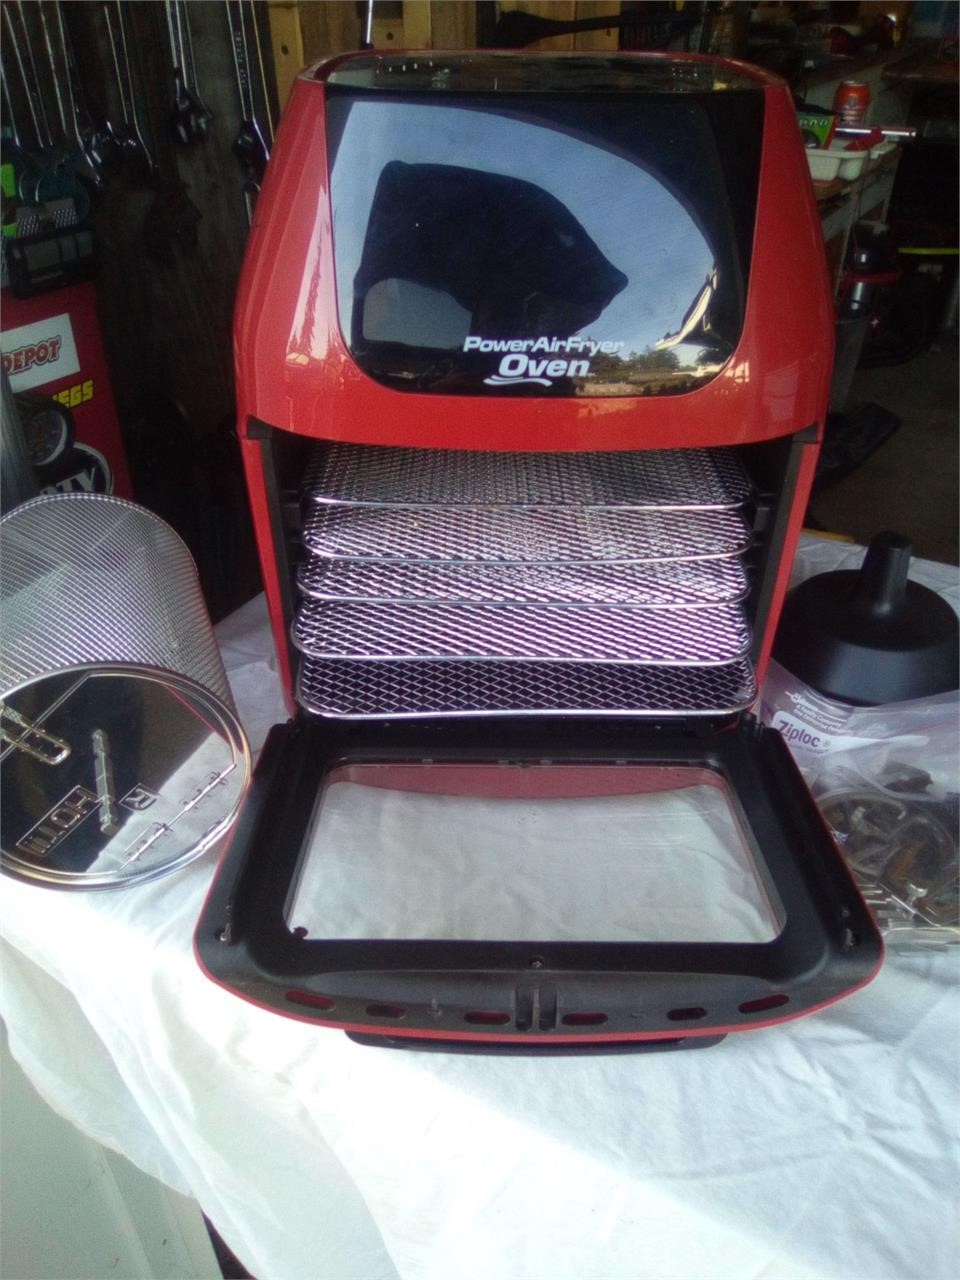 Power Air Fryer with Accessories, Working